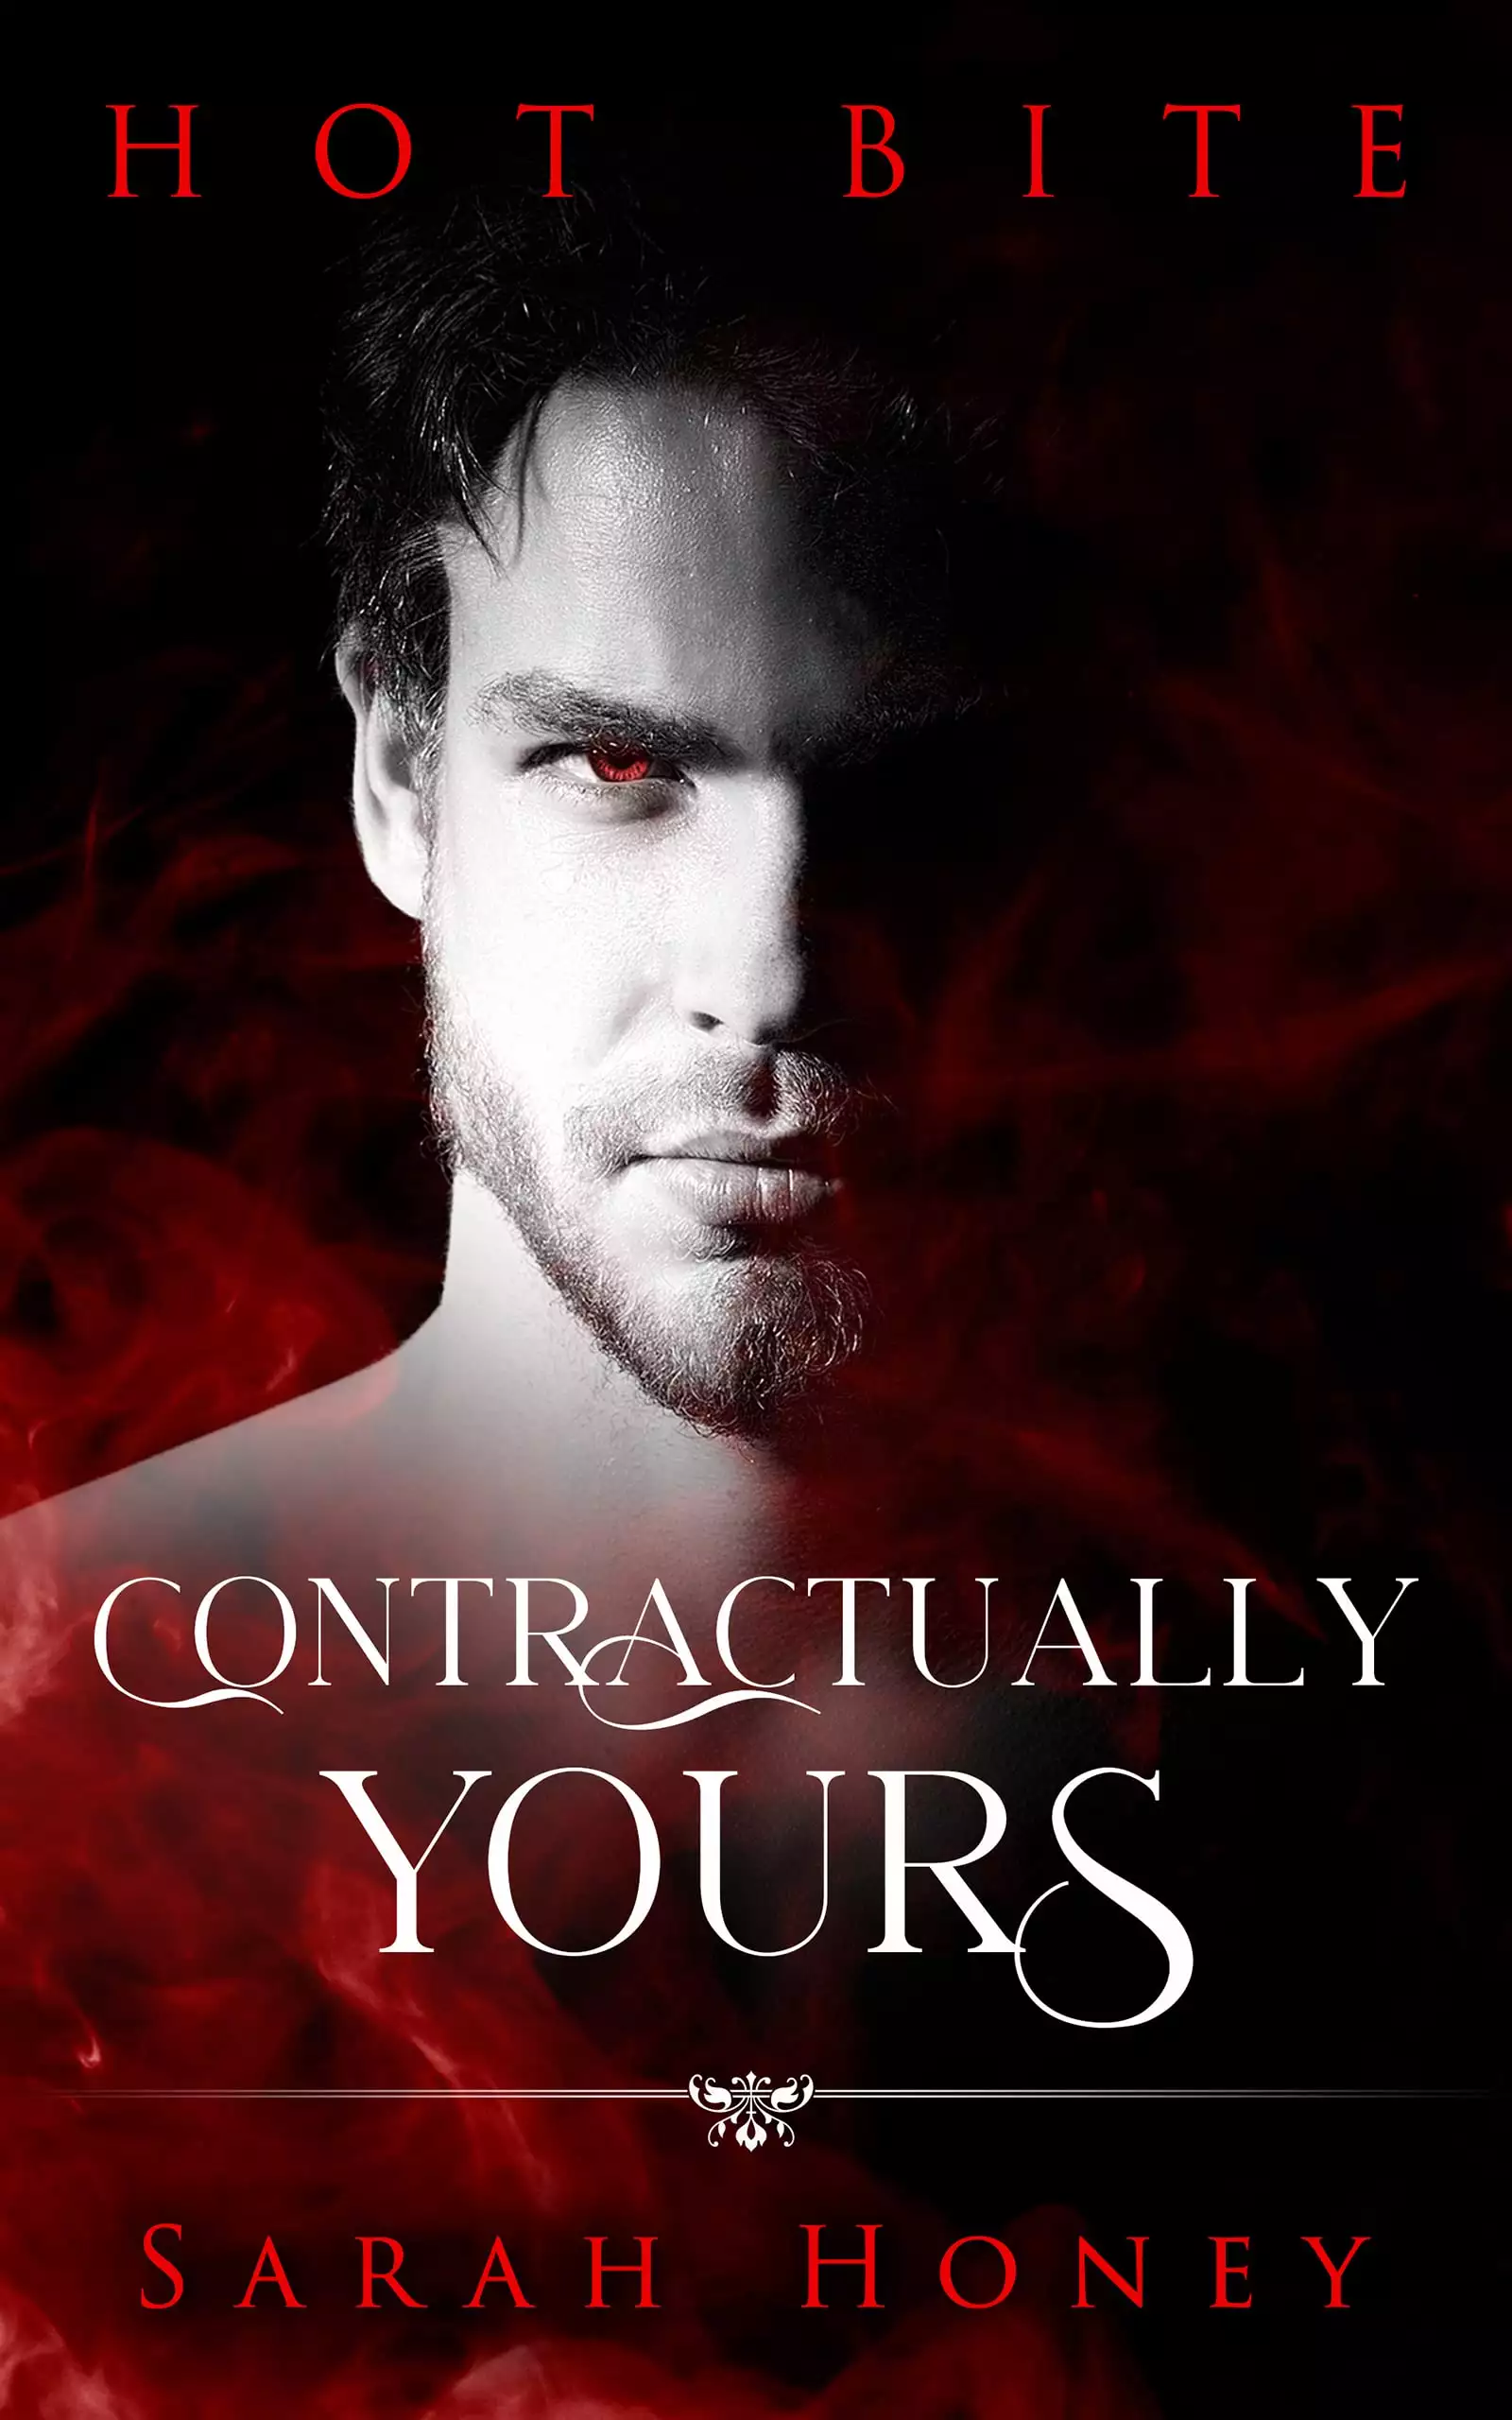 Contractually Yours: A Hot Bite story